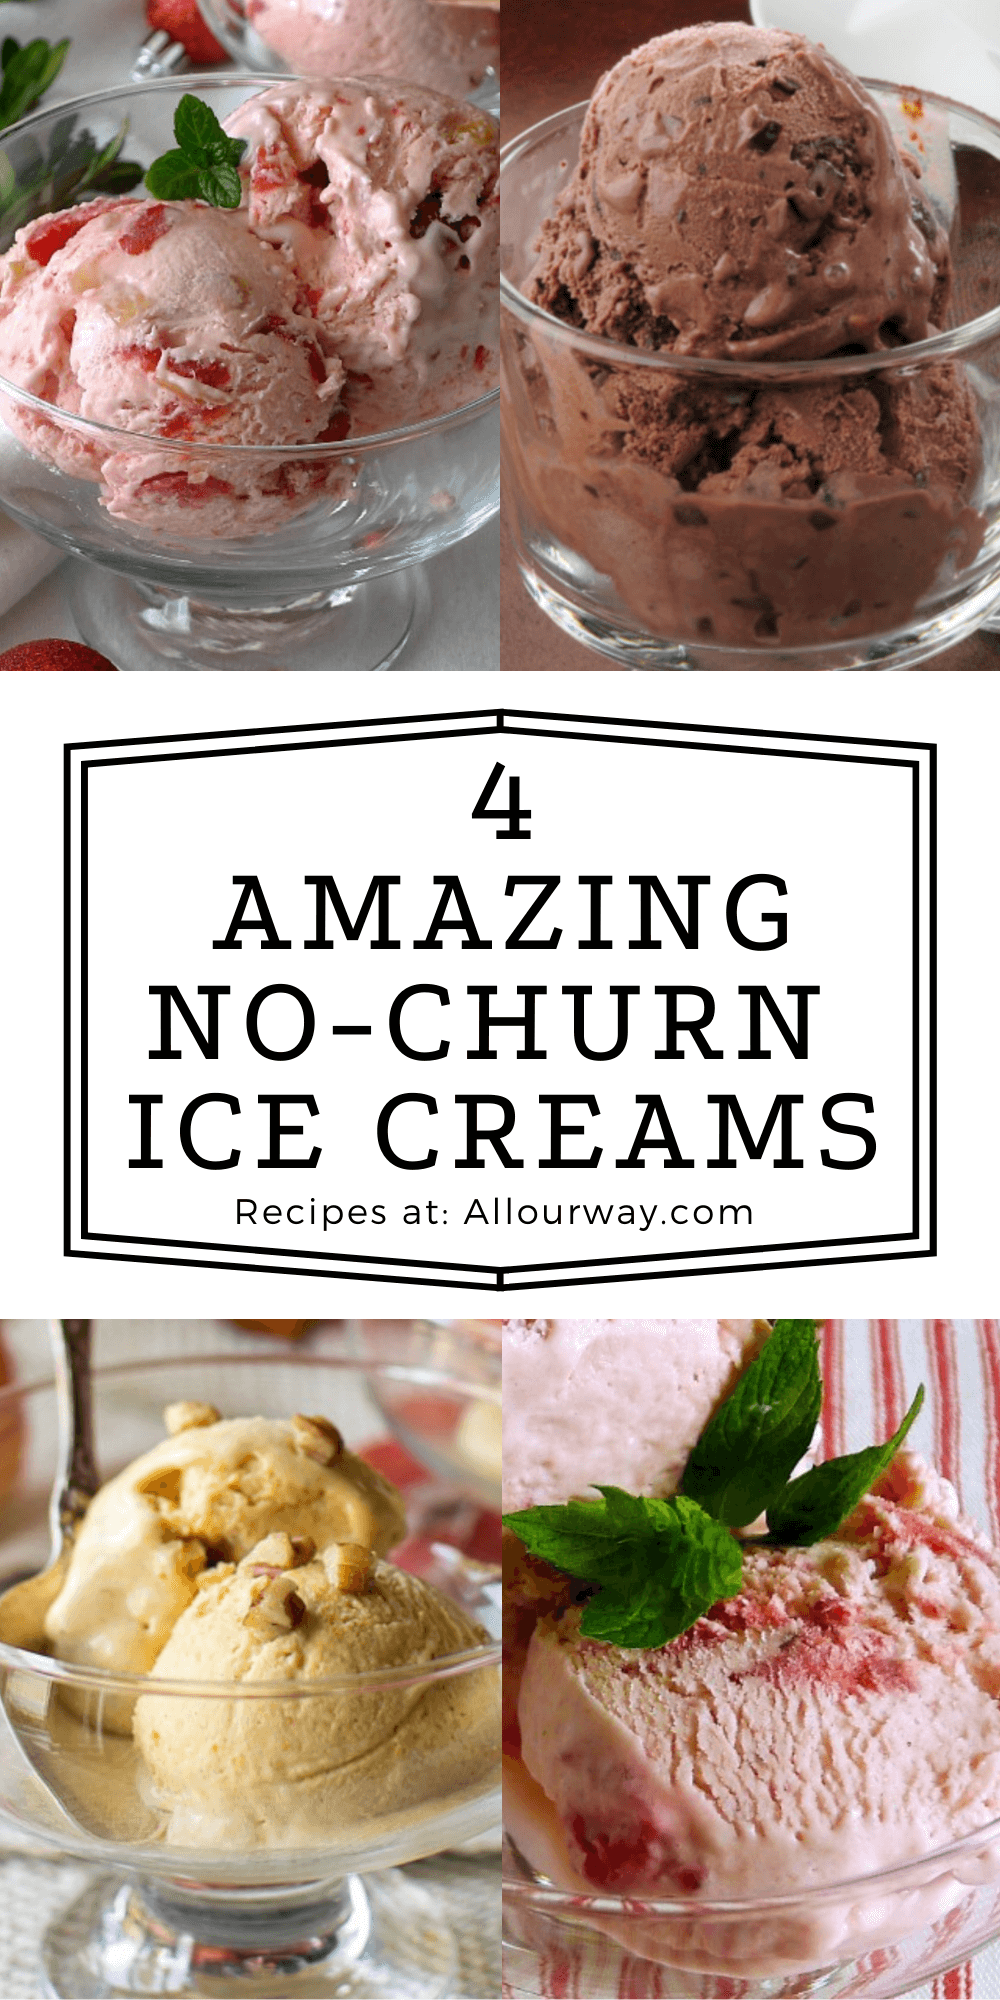 All you need is a Basic No-Churn Ice cream recipe to know how to make the best ice cream with countless variations. We show you how to make it plus give you recipes for variations. Go wild with your imagination. This no-churn ice cream is no-fail.